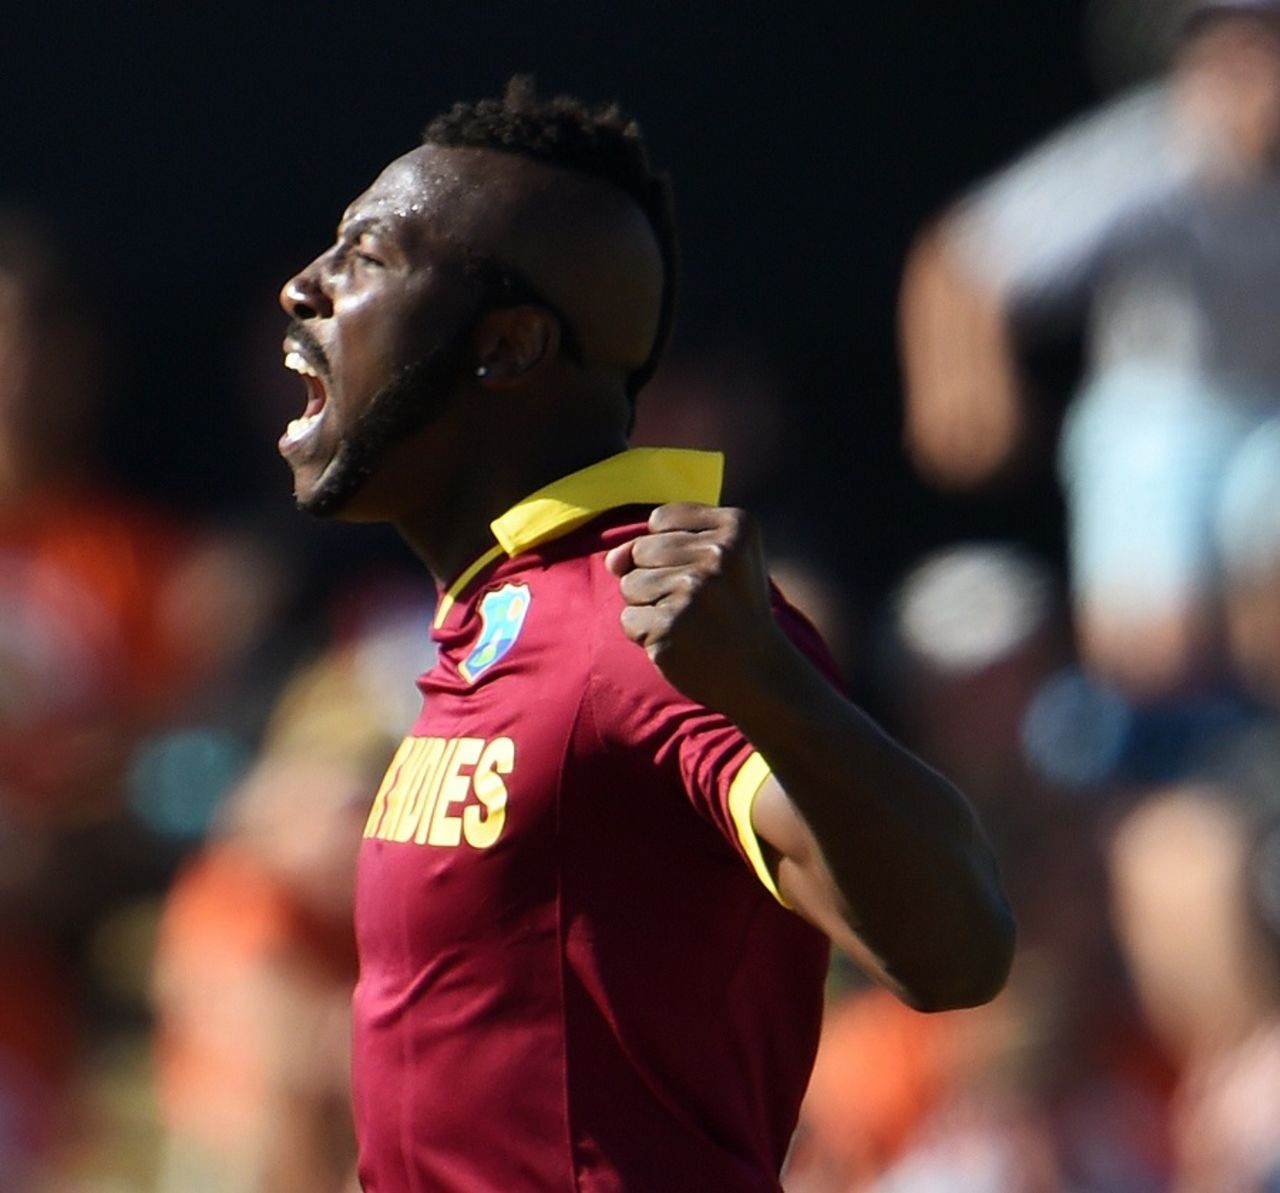 Andre Russell lets out a roar after taking a wicket, Pakistan v West Indies, World Cup 2015, Group B, Christchurch, February 21, 2015